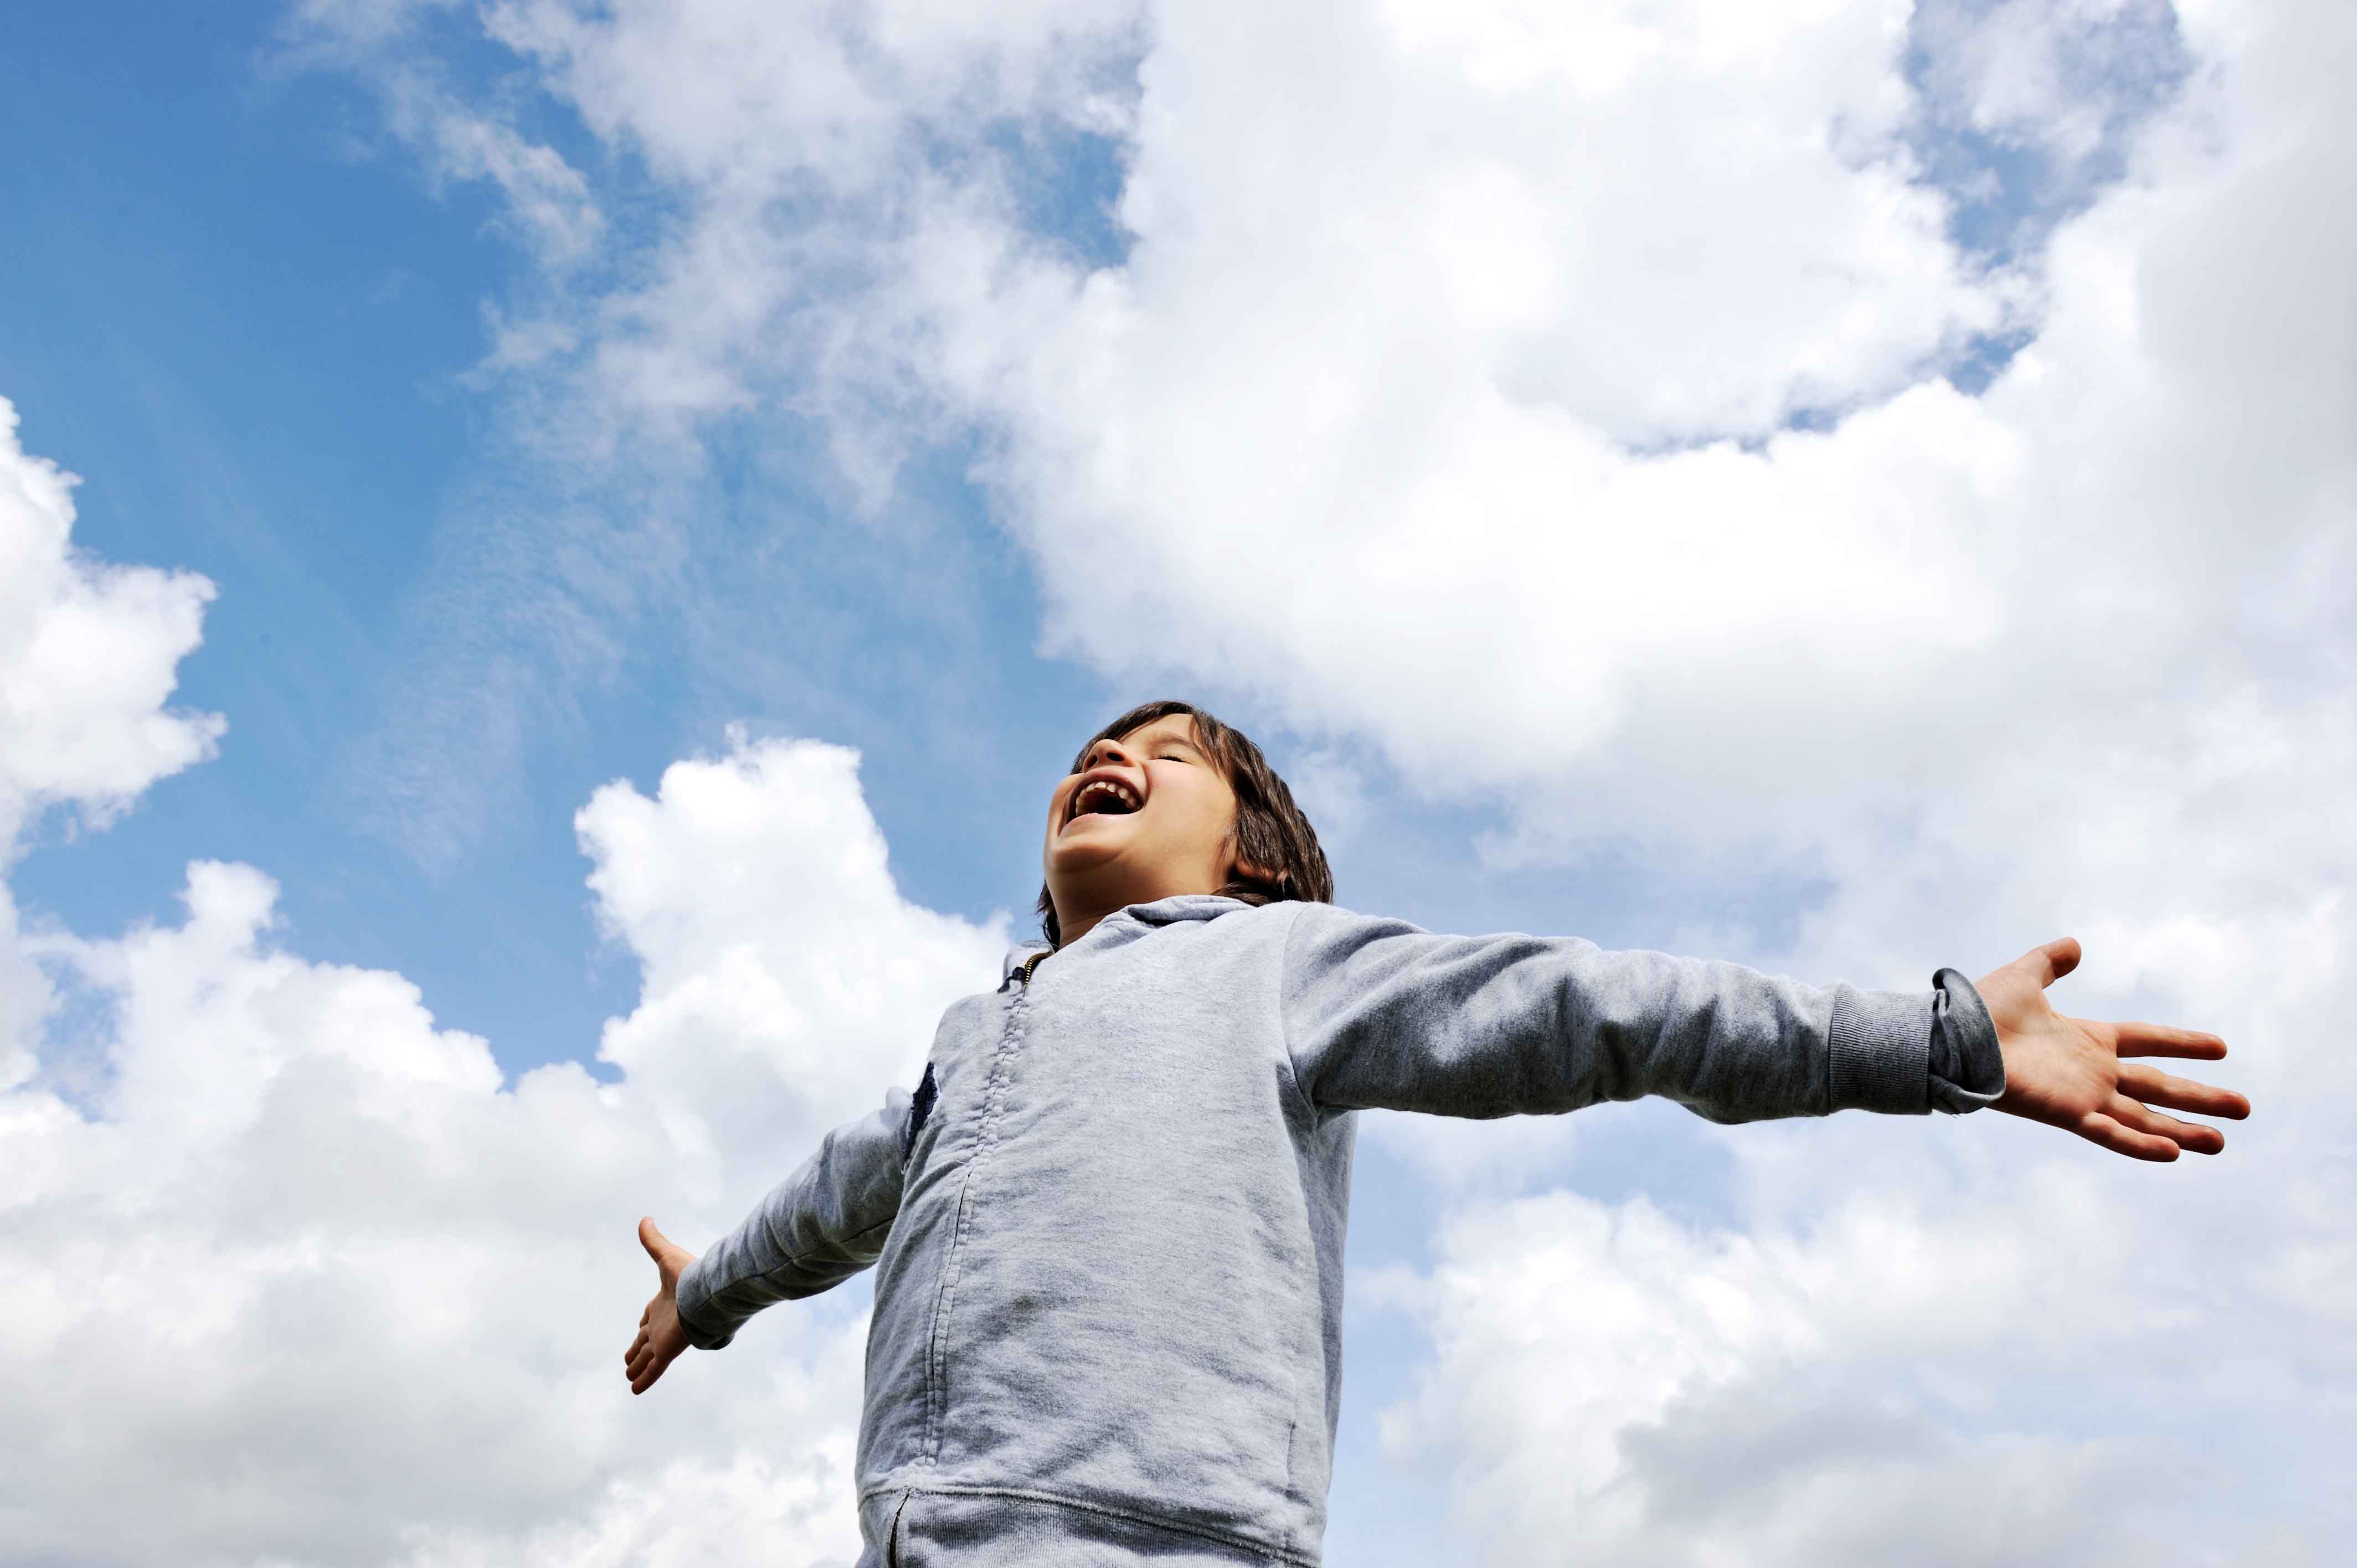 Child, freedom, breathing fresh air in nature